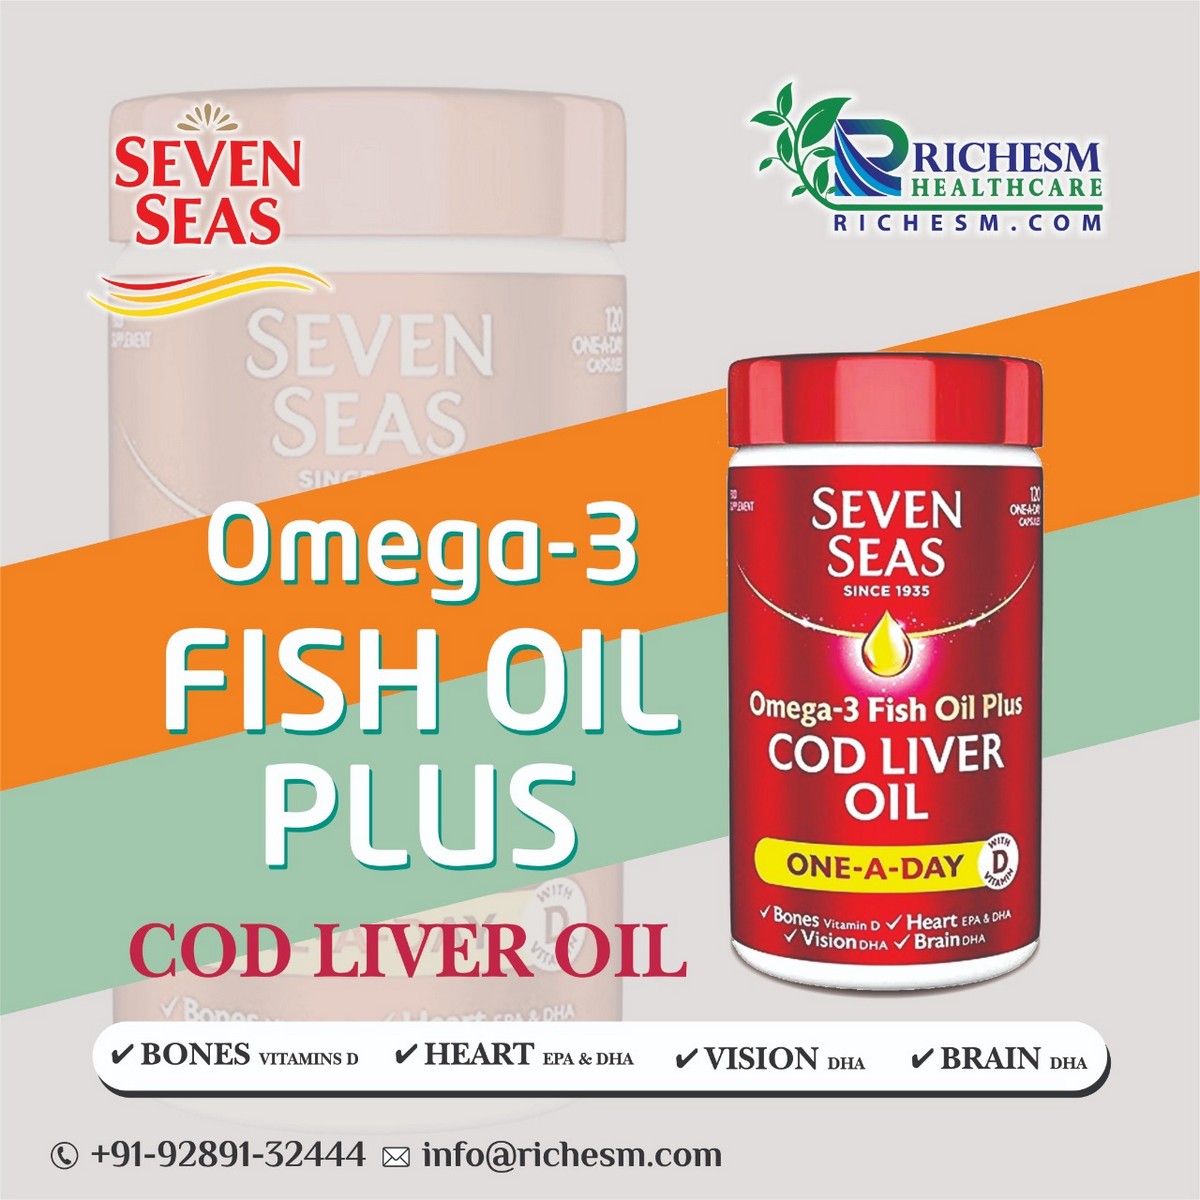 Get a Healthy Liver with Omega 3